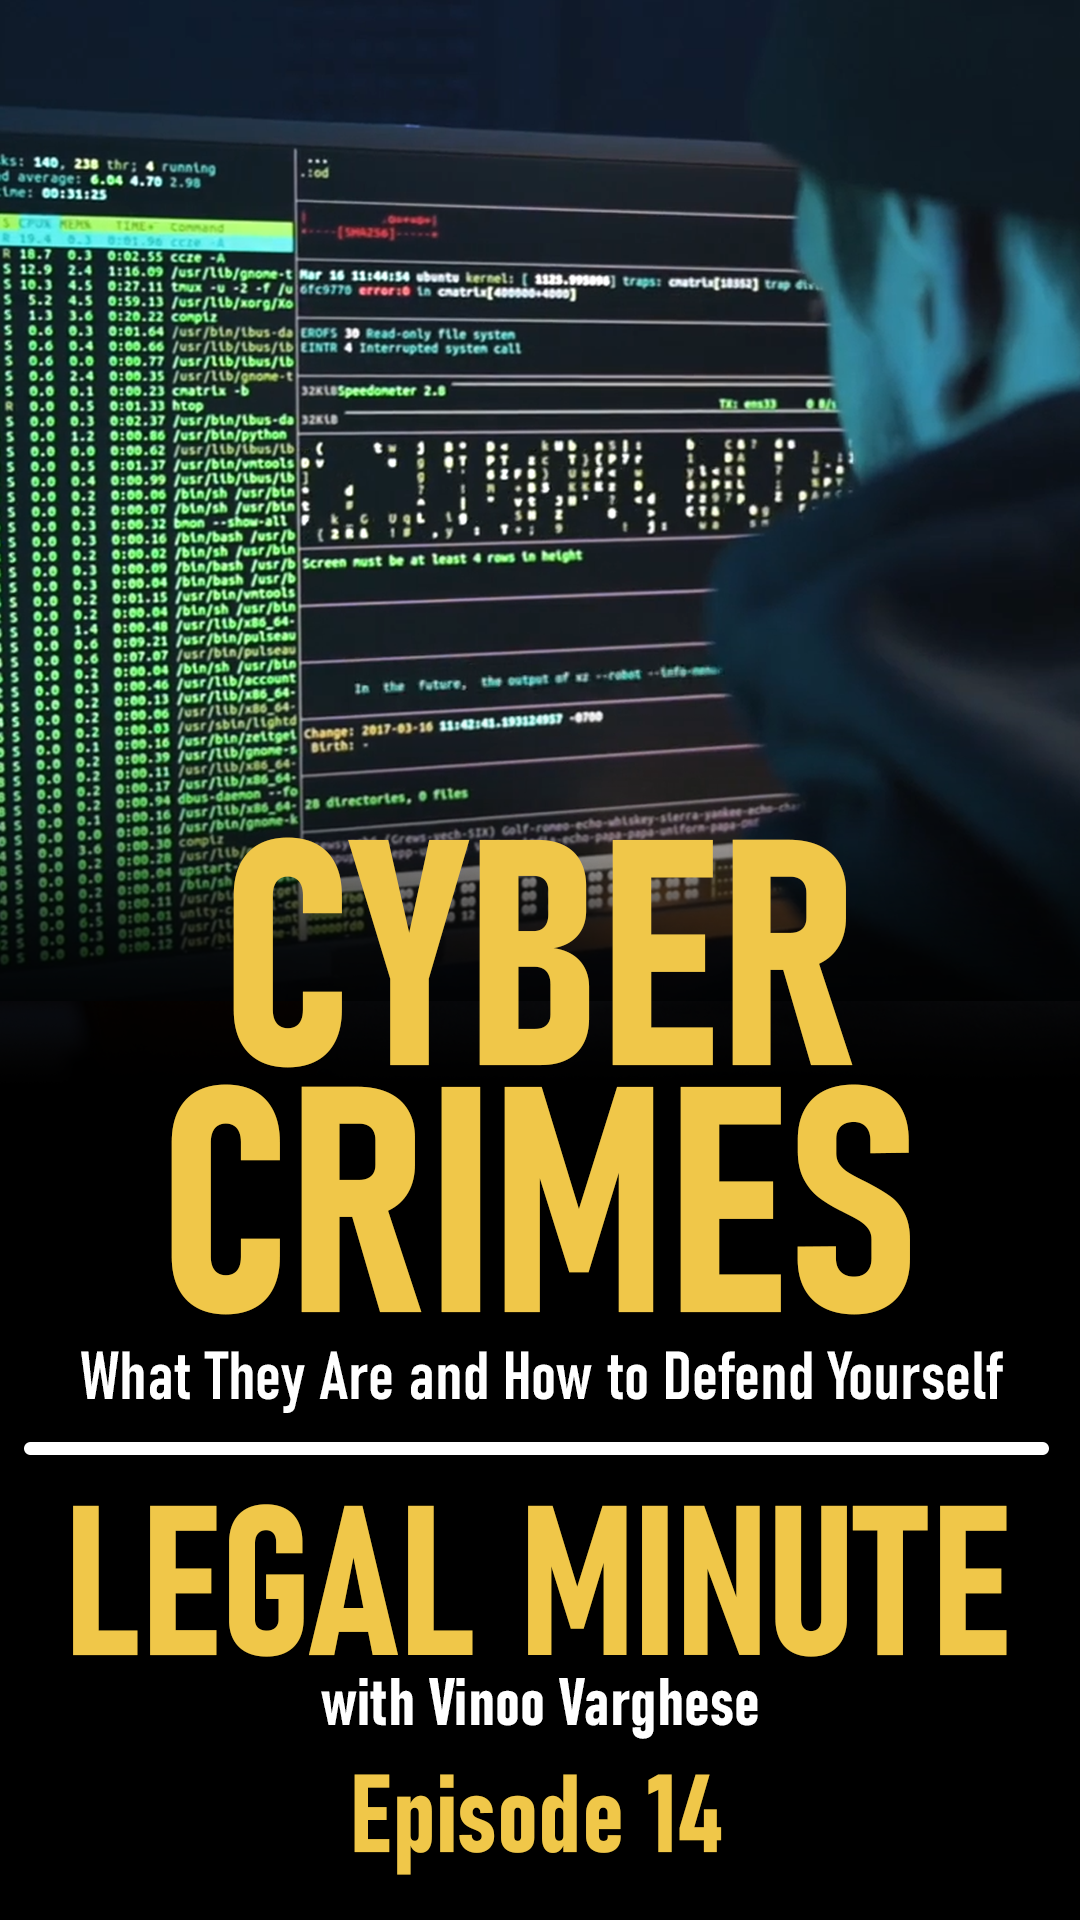 Cybercrime Charges and How to Defend Yourself